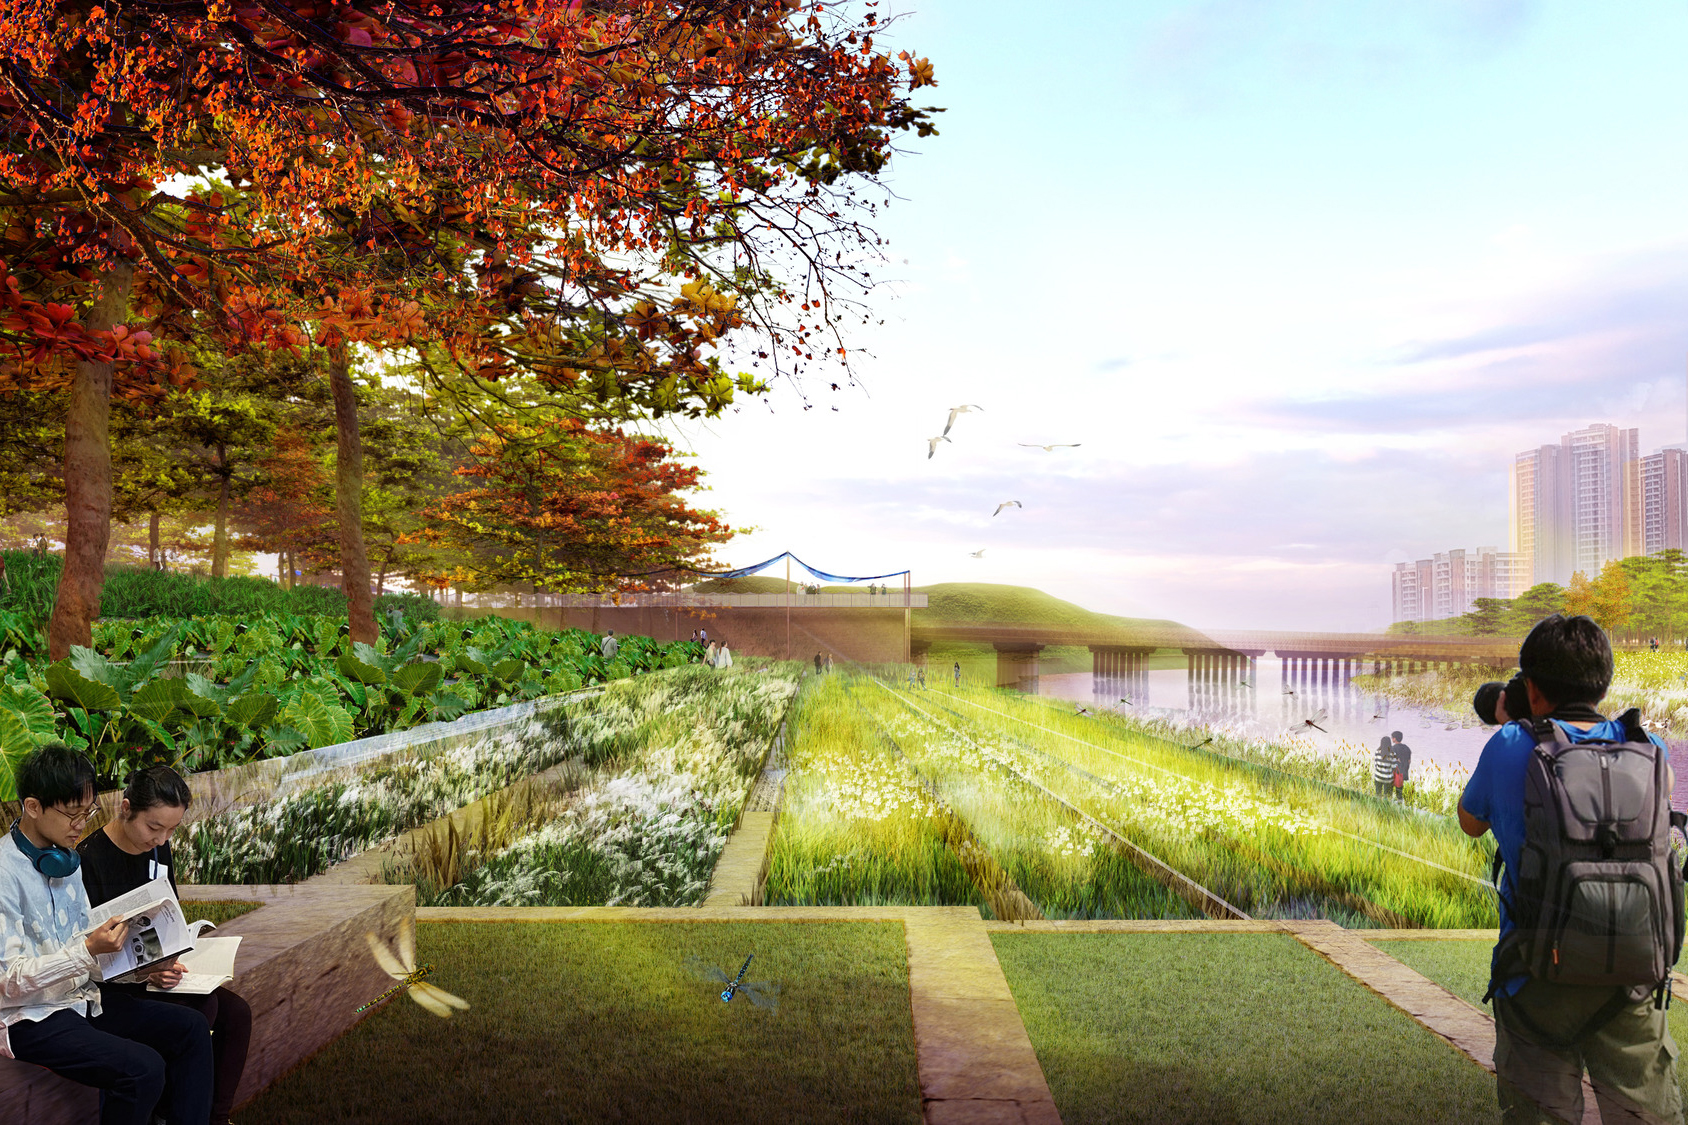 rendering of linear plant gardens with garden house in background